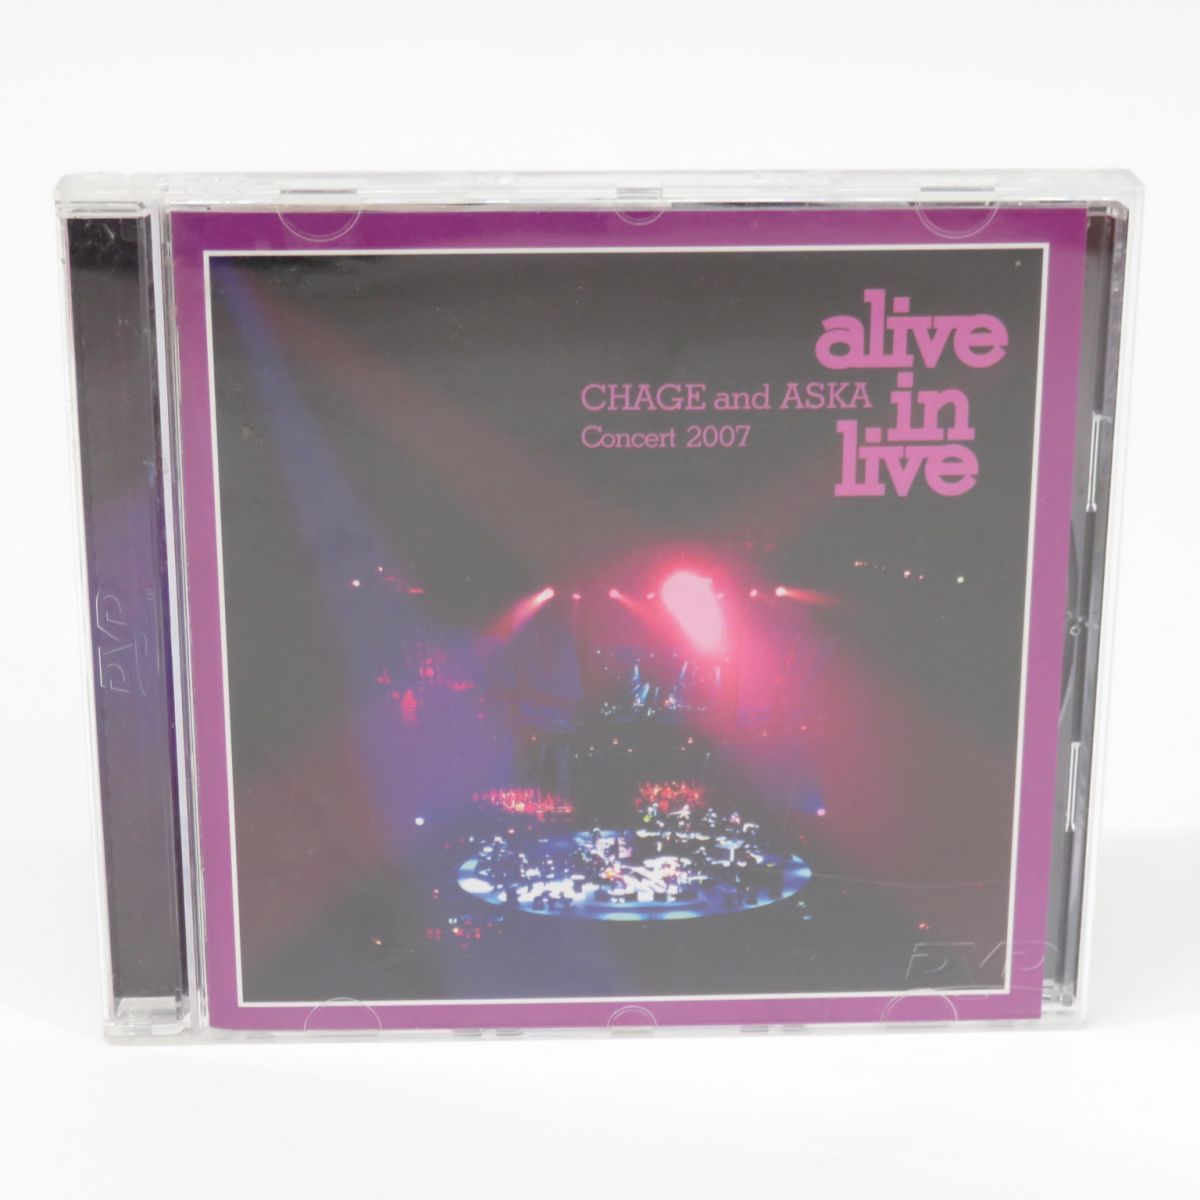 Concert　and　お宝ストア　CHAGE　in　2007　※中古　live　DVD　alive　ASKA　メルカリ